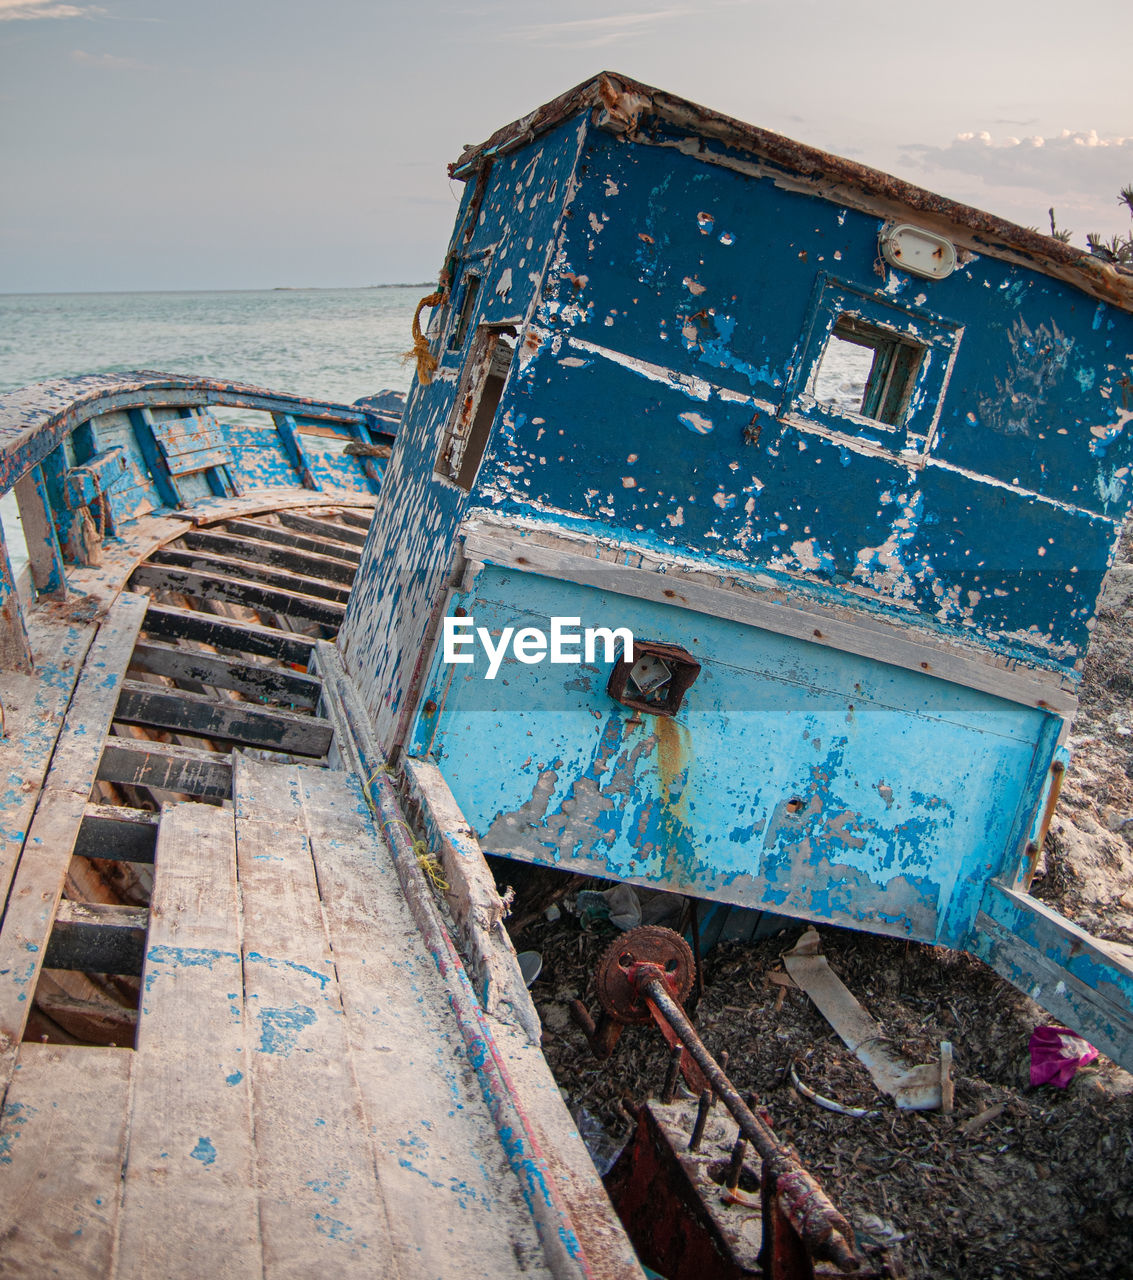 VIEW OF ABANDONED BOAT AGAINST SEA